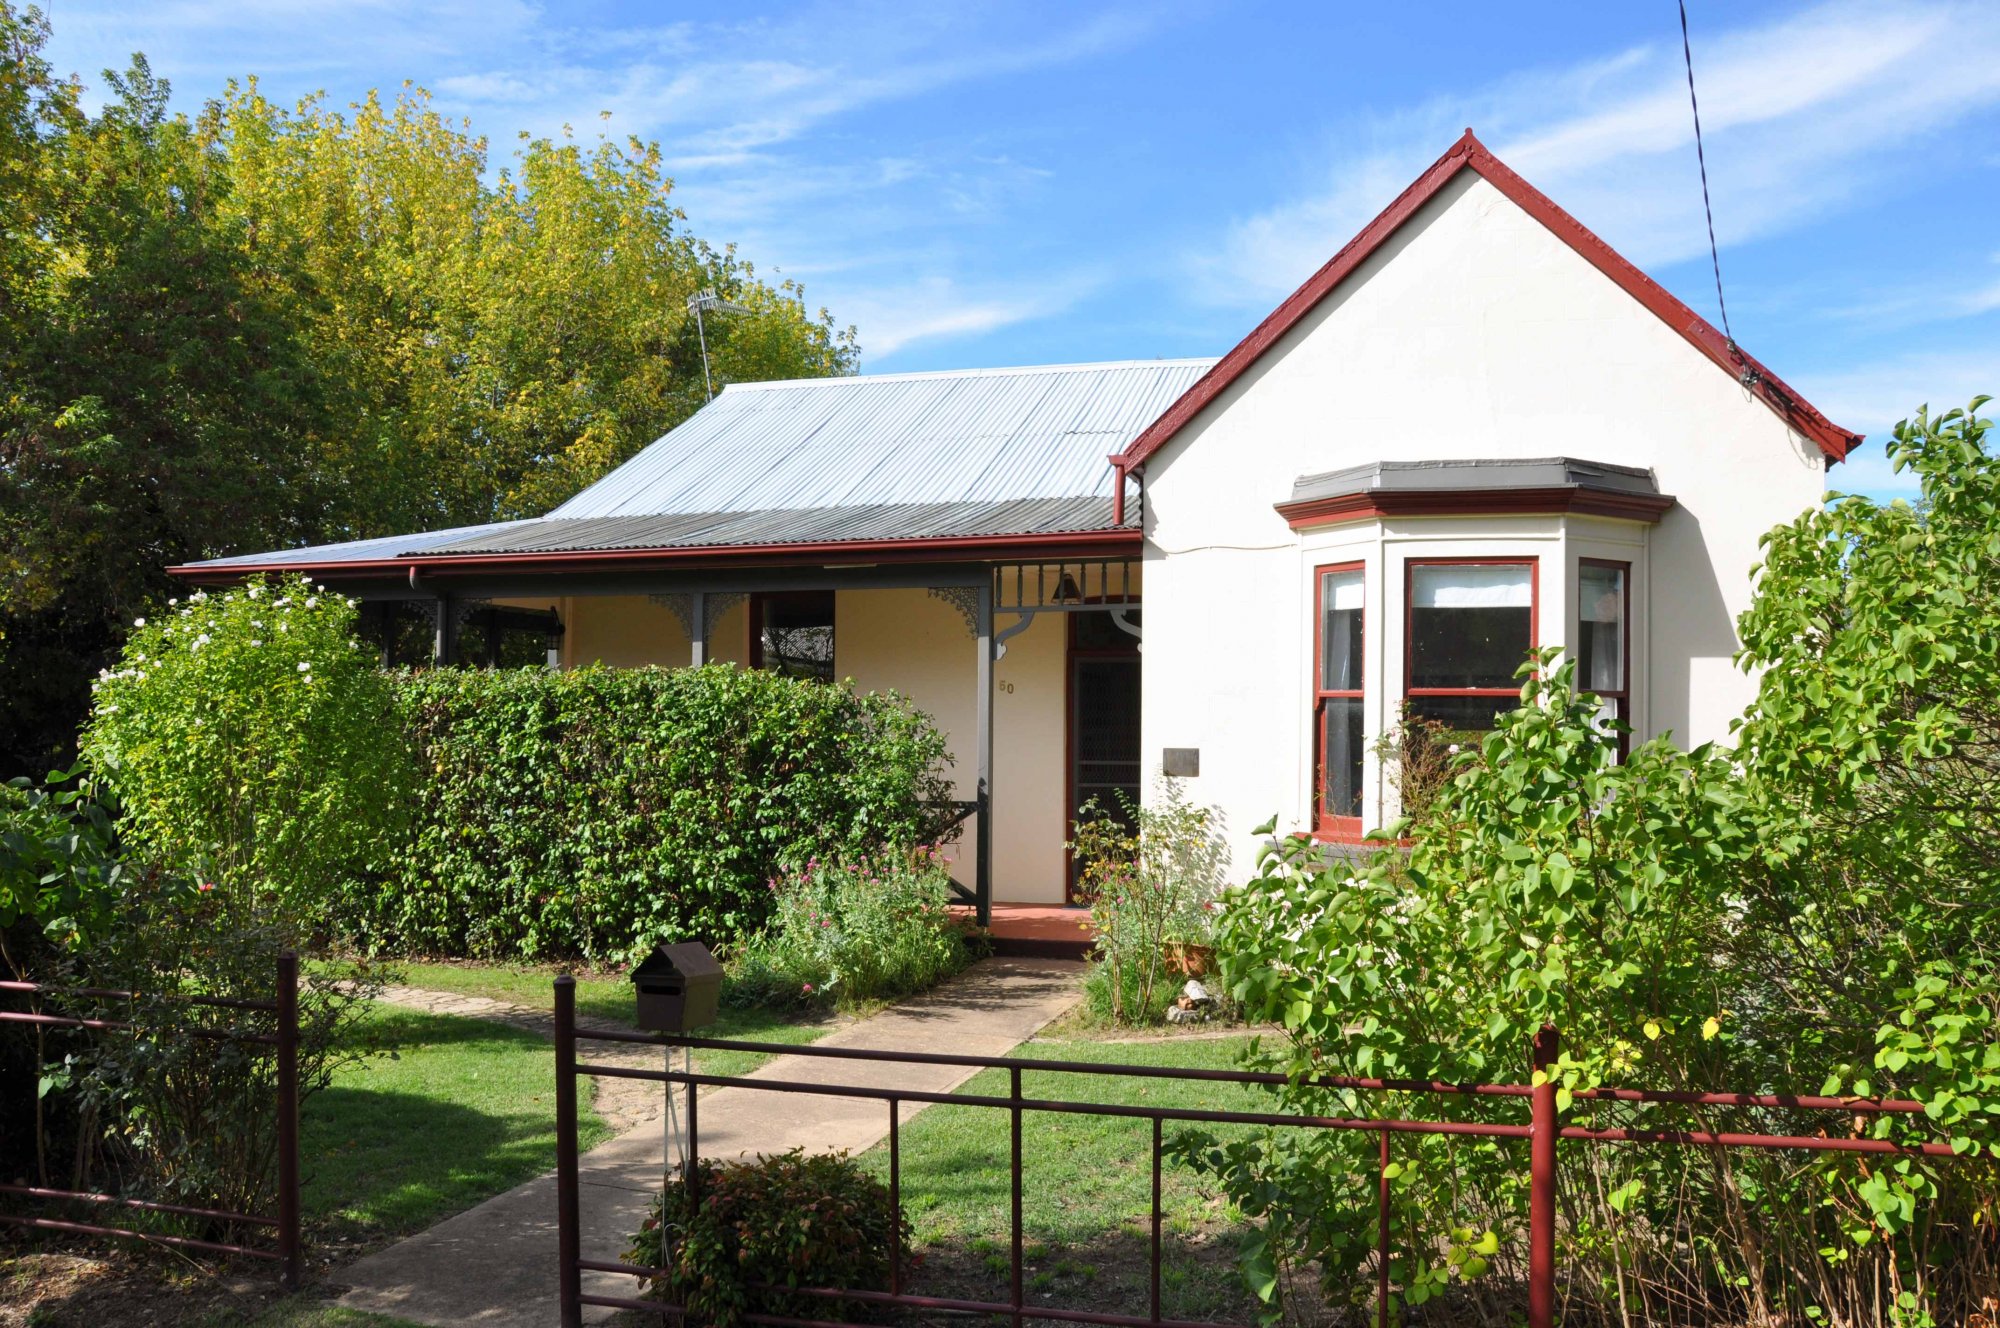 Buy a piece of Cooma history for $529,000